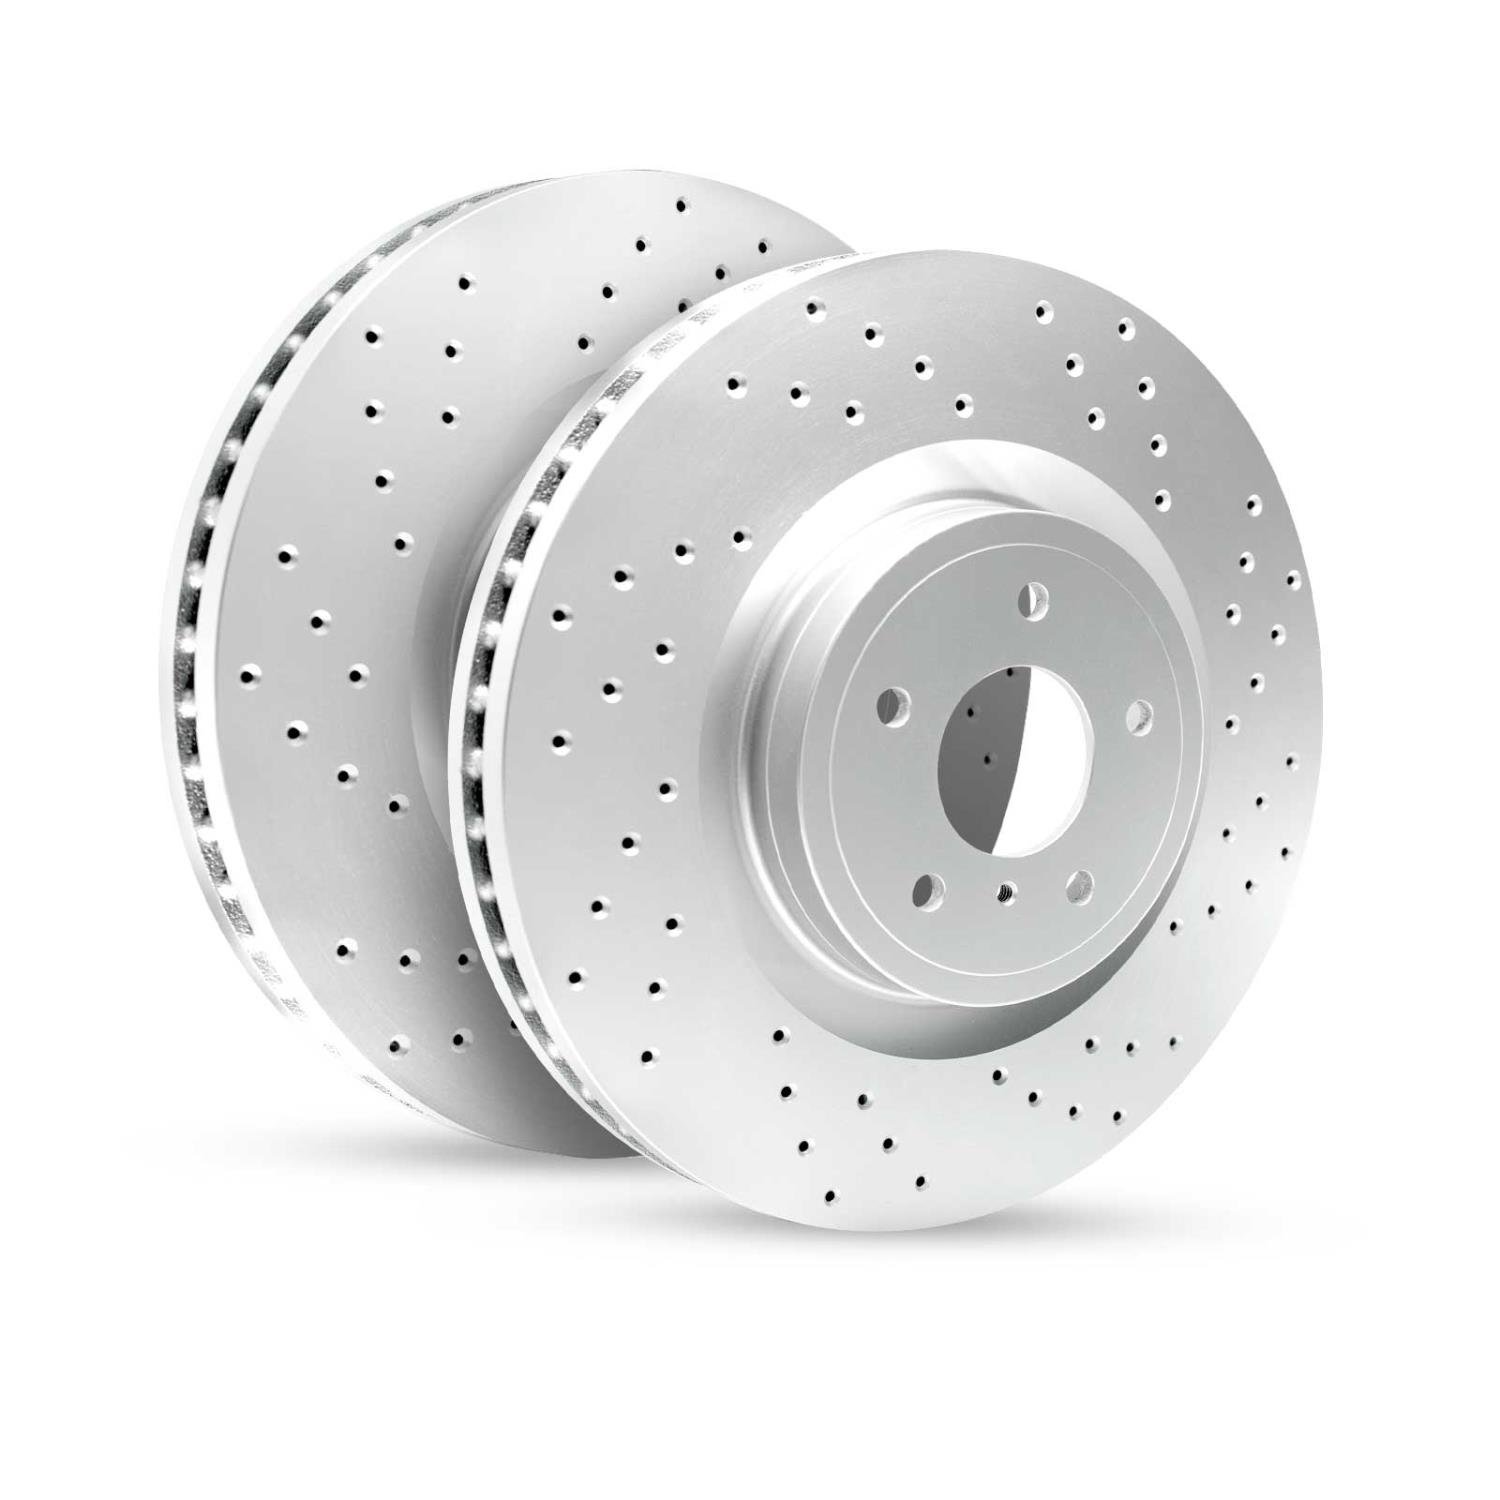 GEO-Carbon Drilled/Slotted Rotors, 2005-2010 Fits Multiple Makes/Models, Position: Front